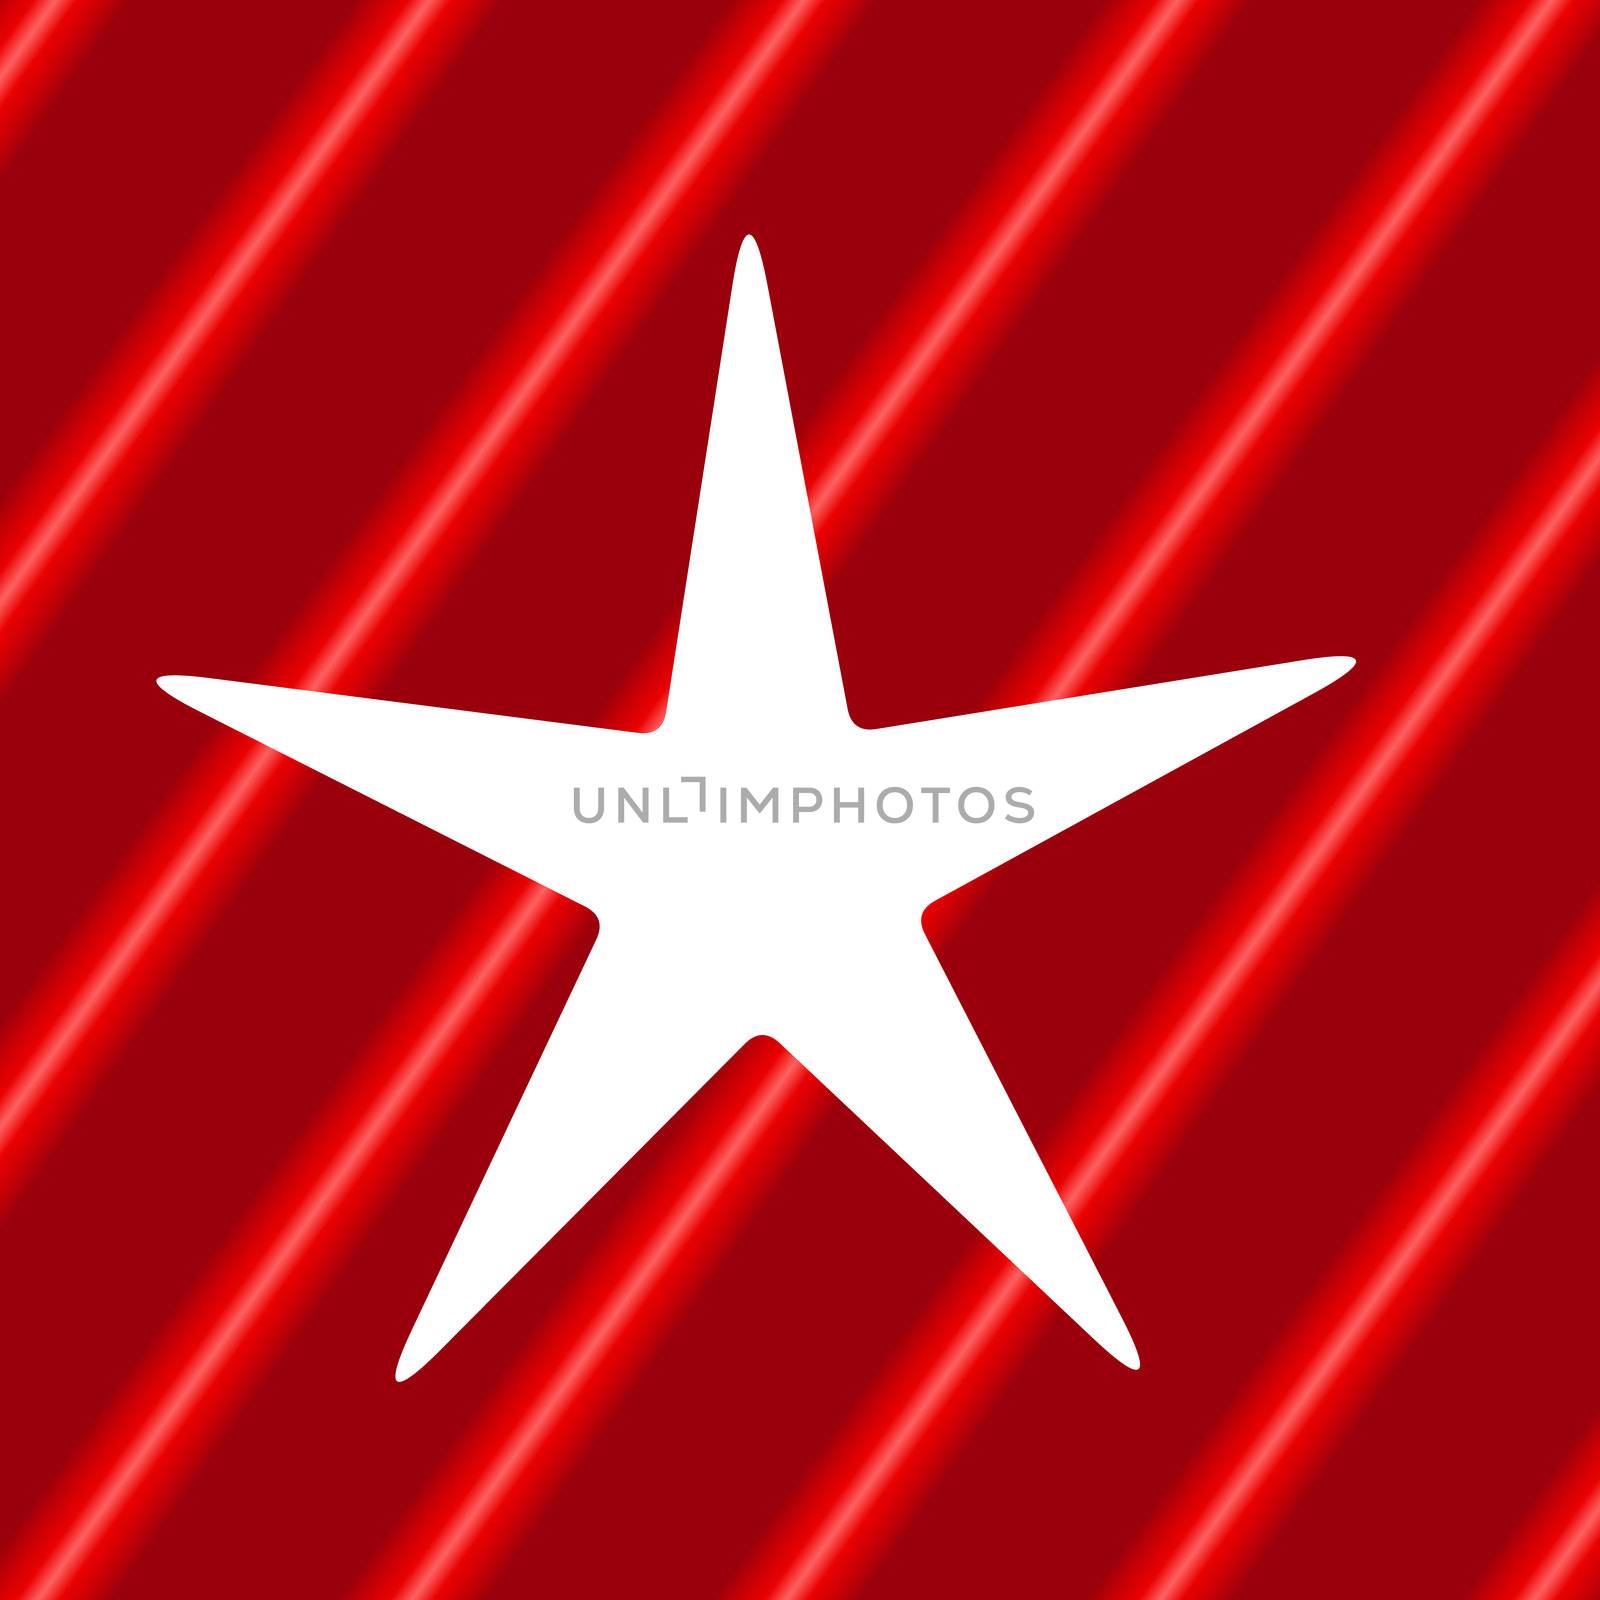 An illustration of a white Christmas star on a red candy cane stripped background.